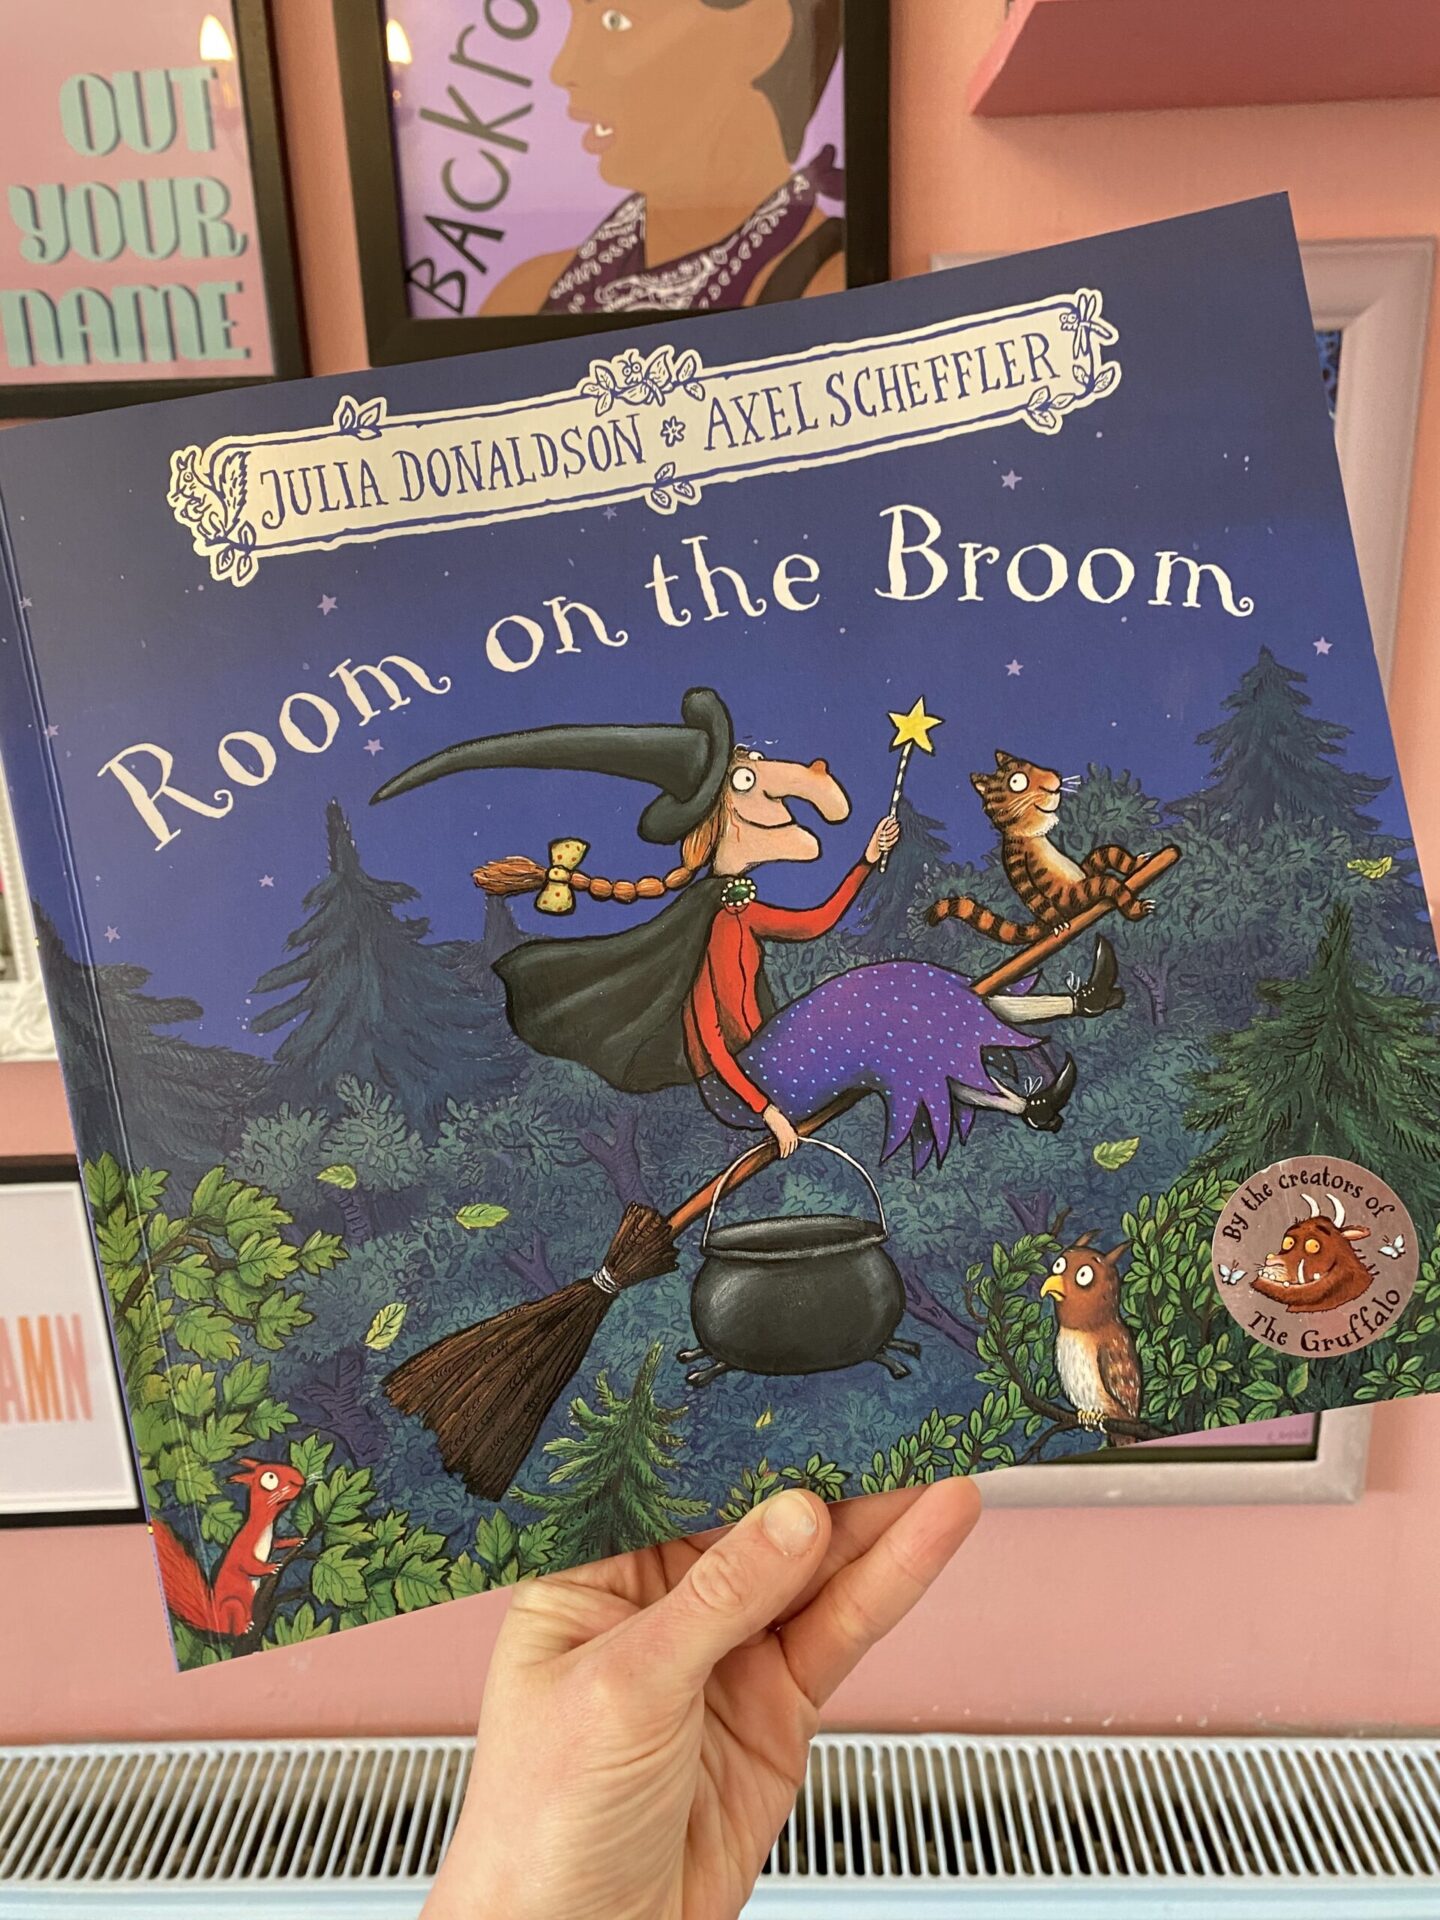 Room on the broom book for kids